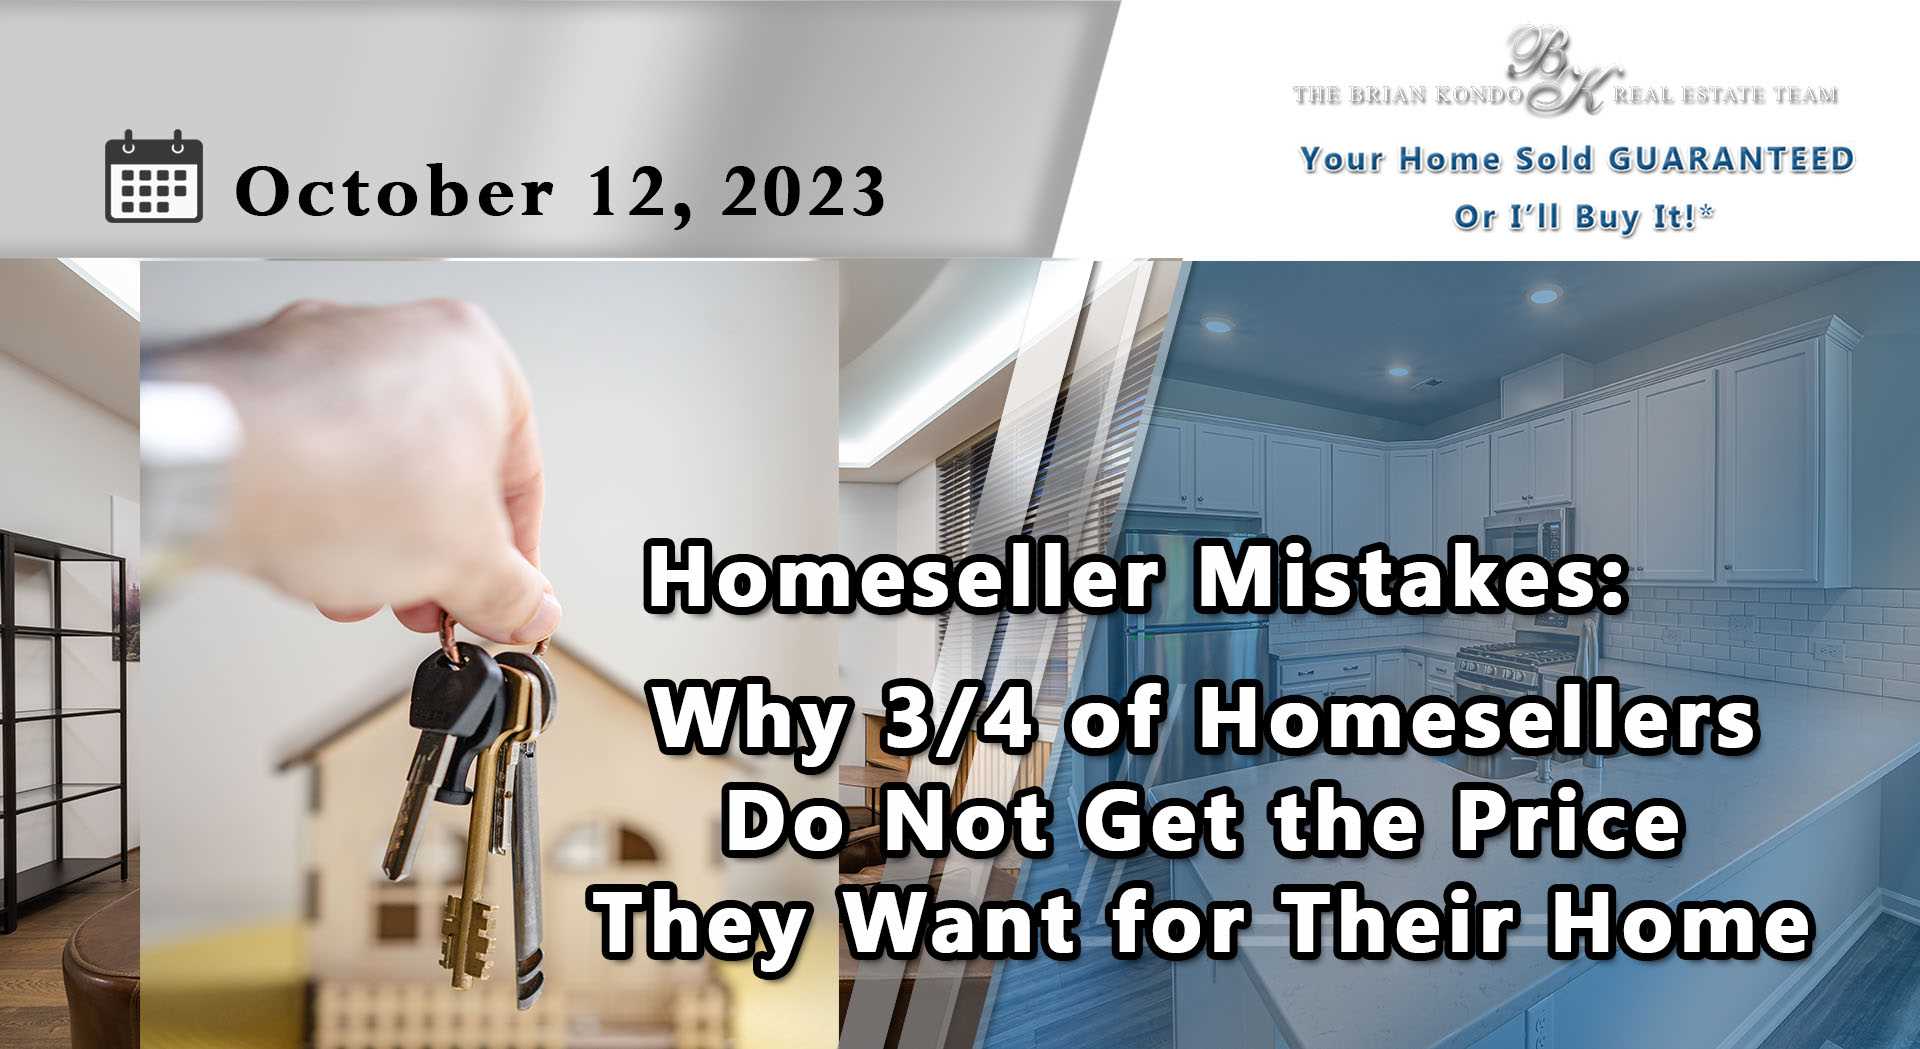 Why 3/4 of Homesellers Do Not Get the Price They Want for Their Home